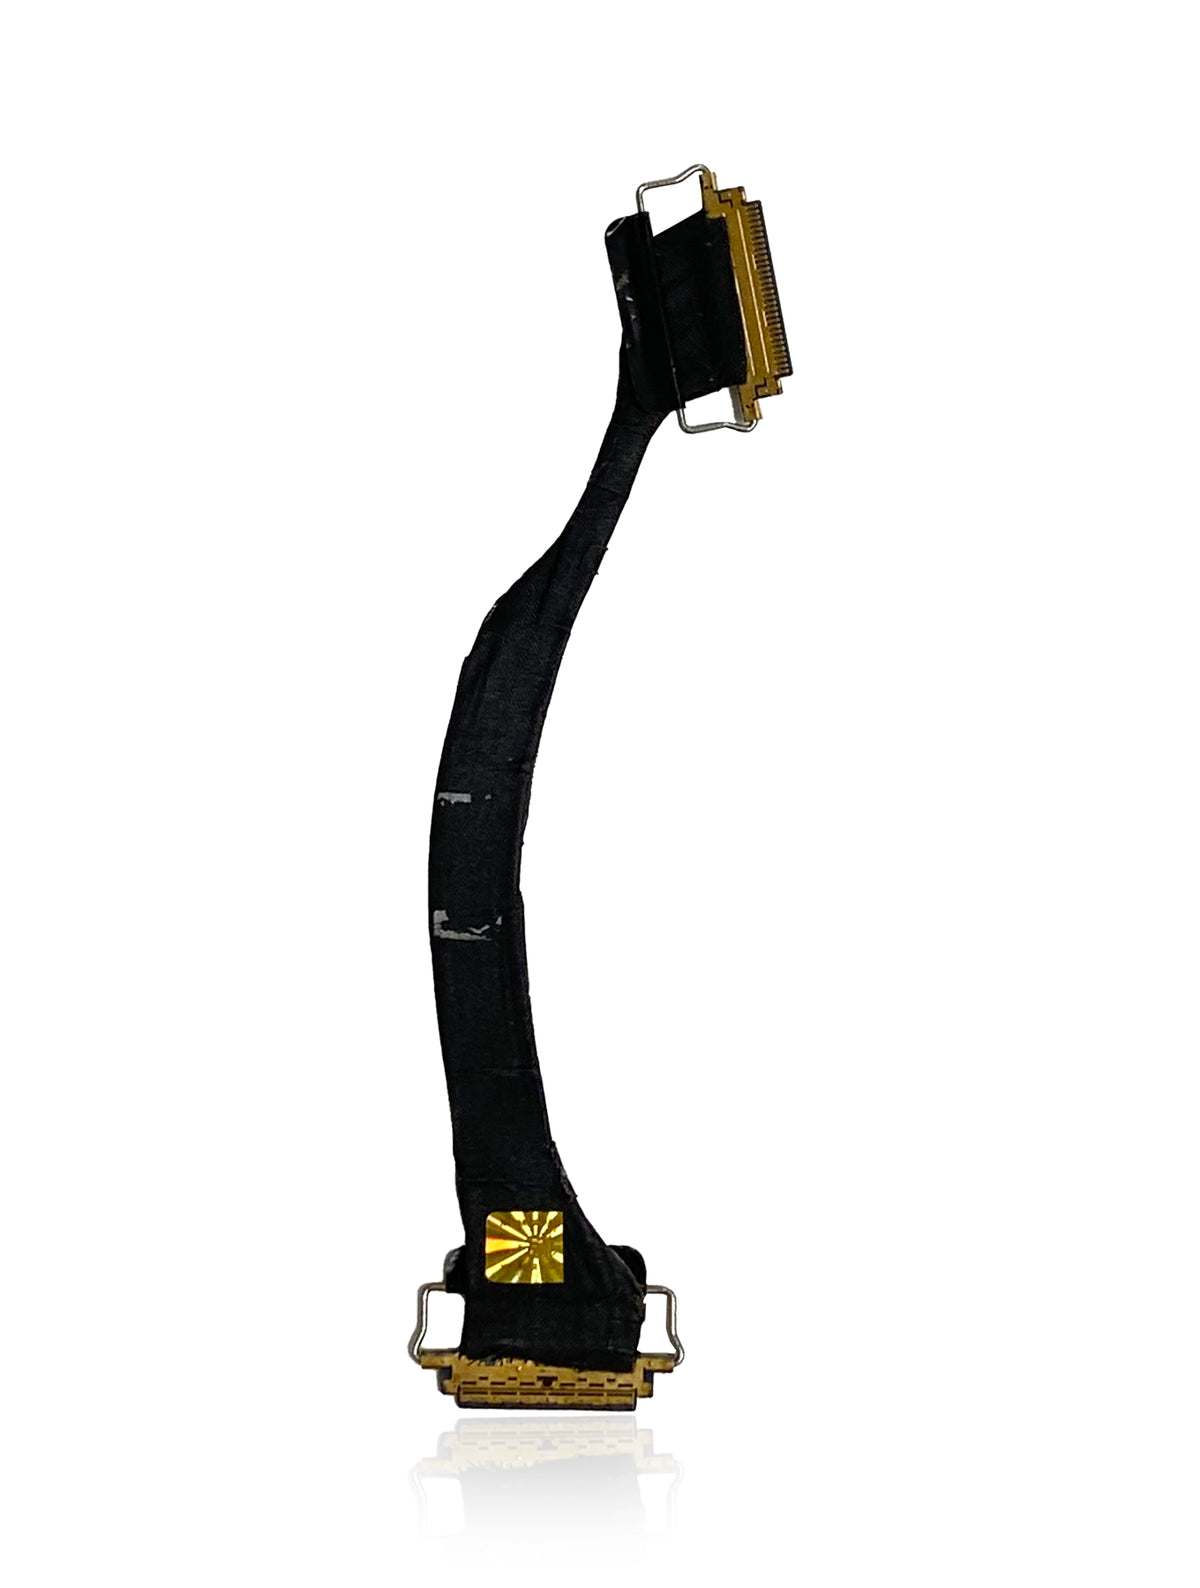 I/O BOARD DATA FLEX CABLE  FOR MACBOOK PRO 15" RETINA A1398 (EARLY 2013 / MID 2012 / LATE 2013 / MID 2014 / MID 2015)